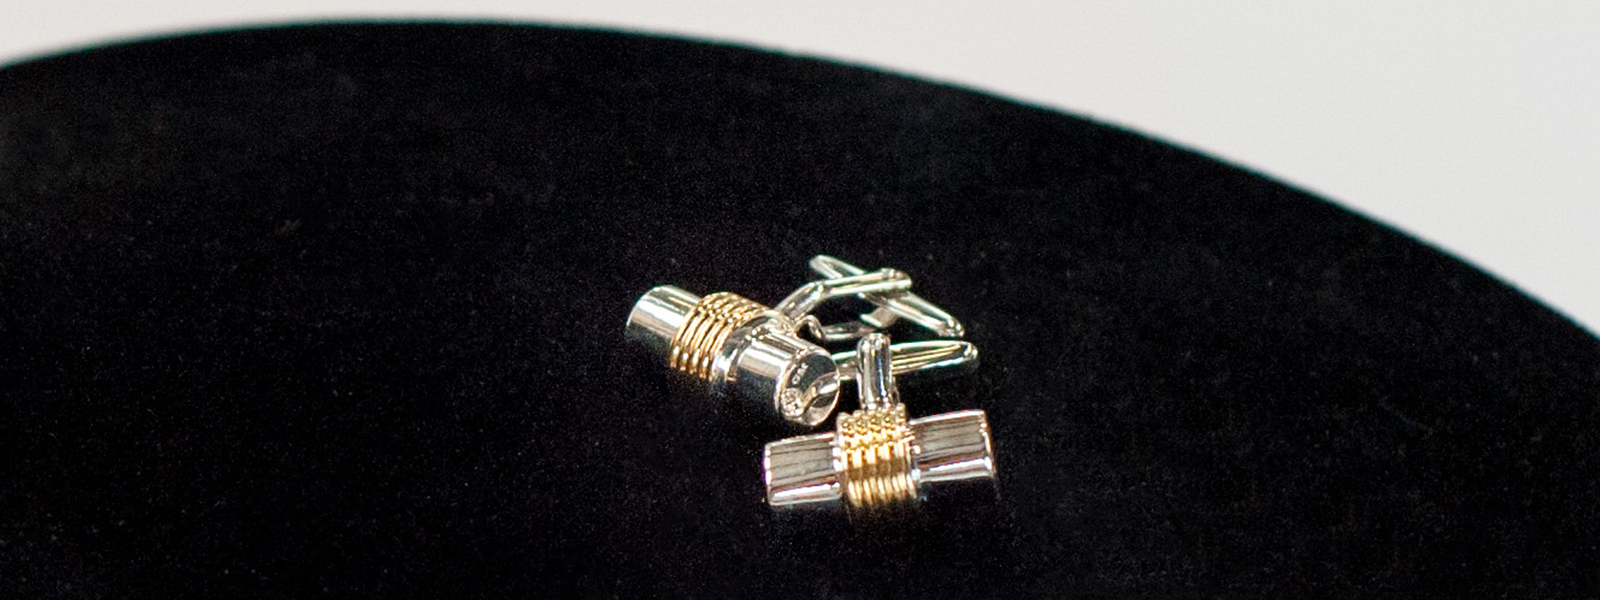 Cufflinks containing cremated remains